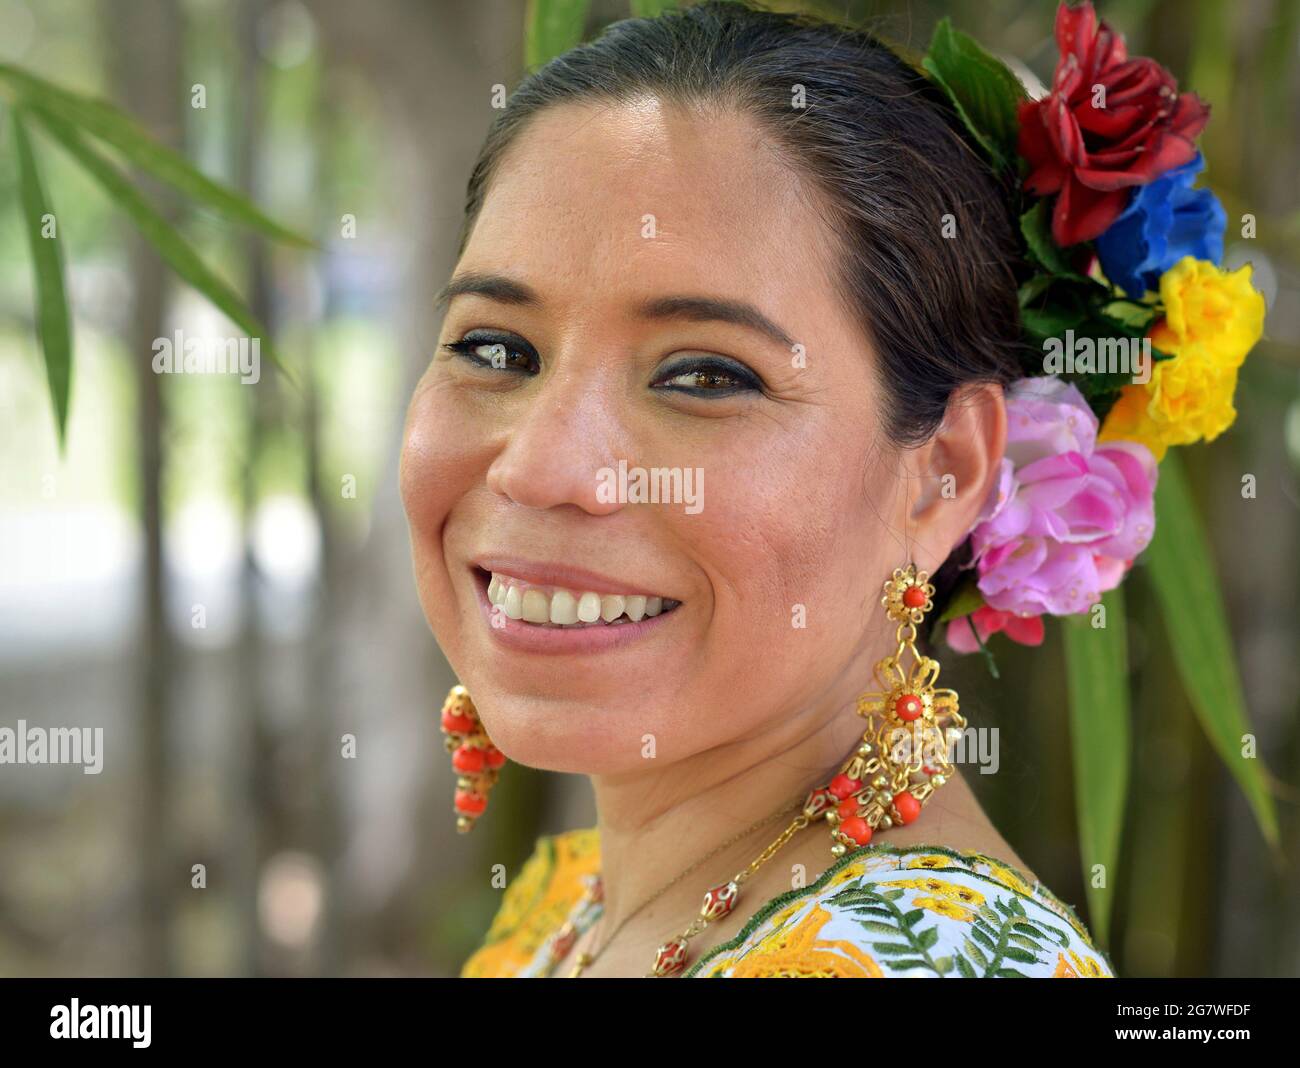 Young Mexican Yucatecan woman wears traditional Mayan folkloric dress with long earrings and colorful flowers in her hair at a park background. Stock Photo